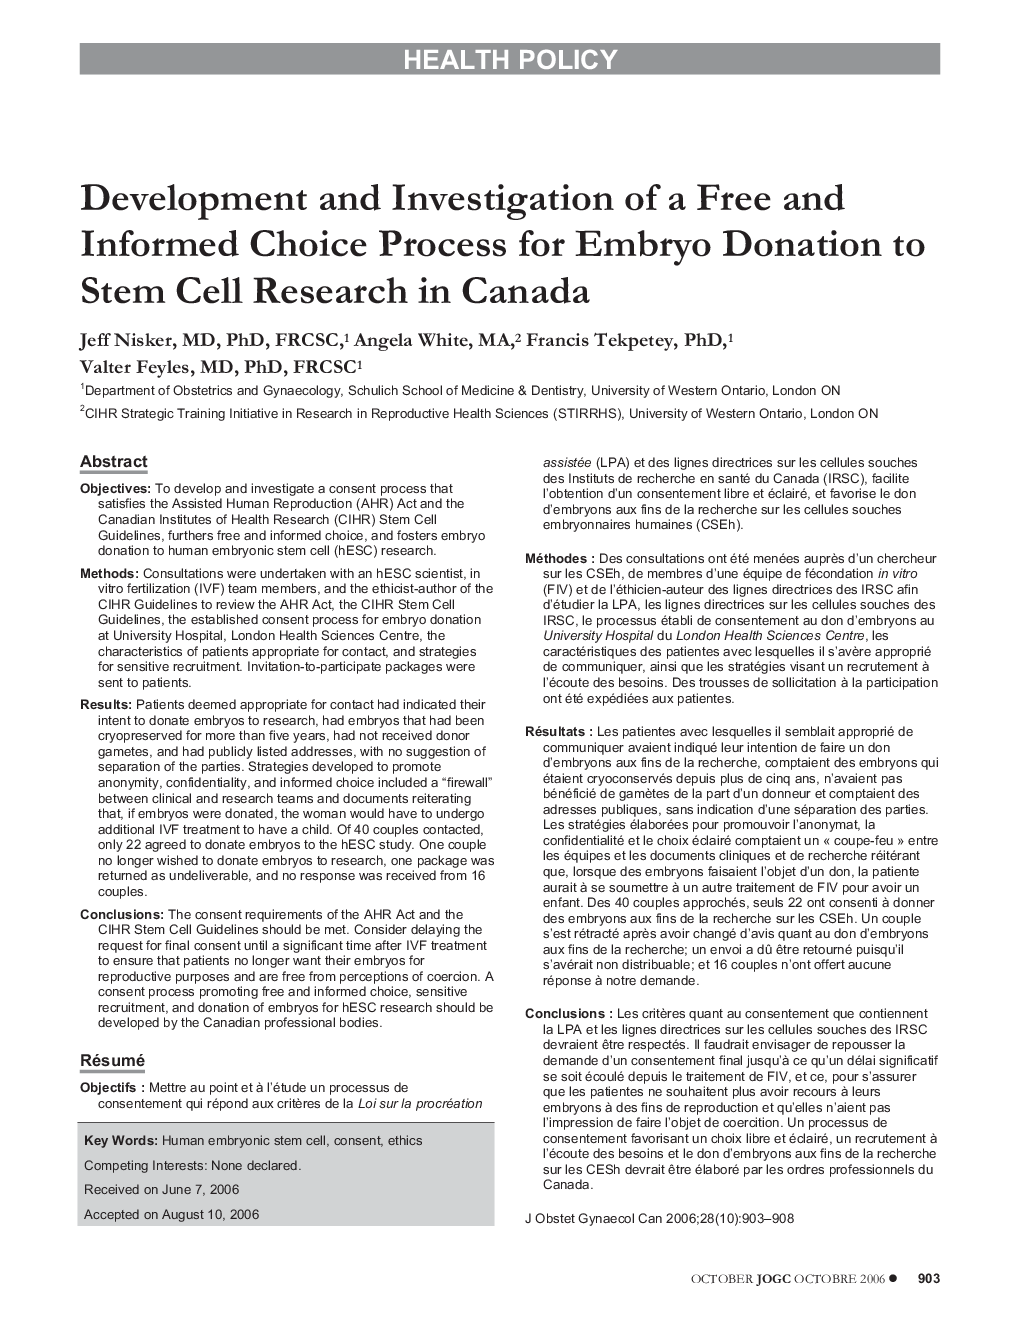 Development and Investigation of a Free and Informed Choice Process for Embryo Donation to Stem Cell Research in Canada